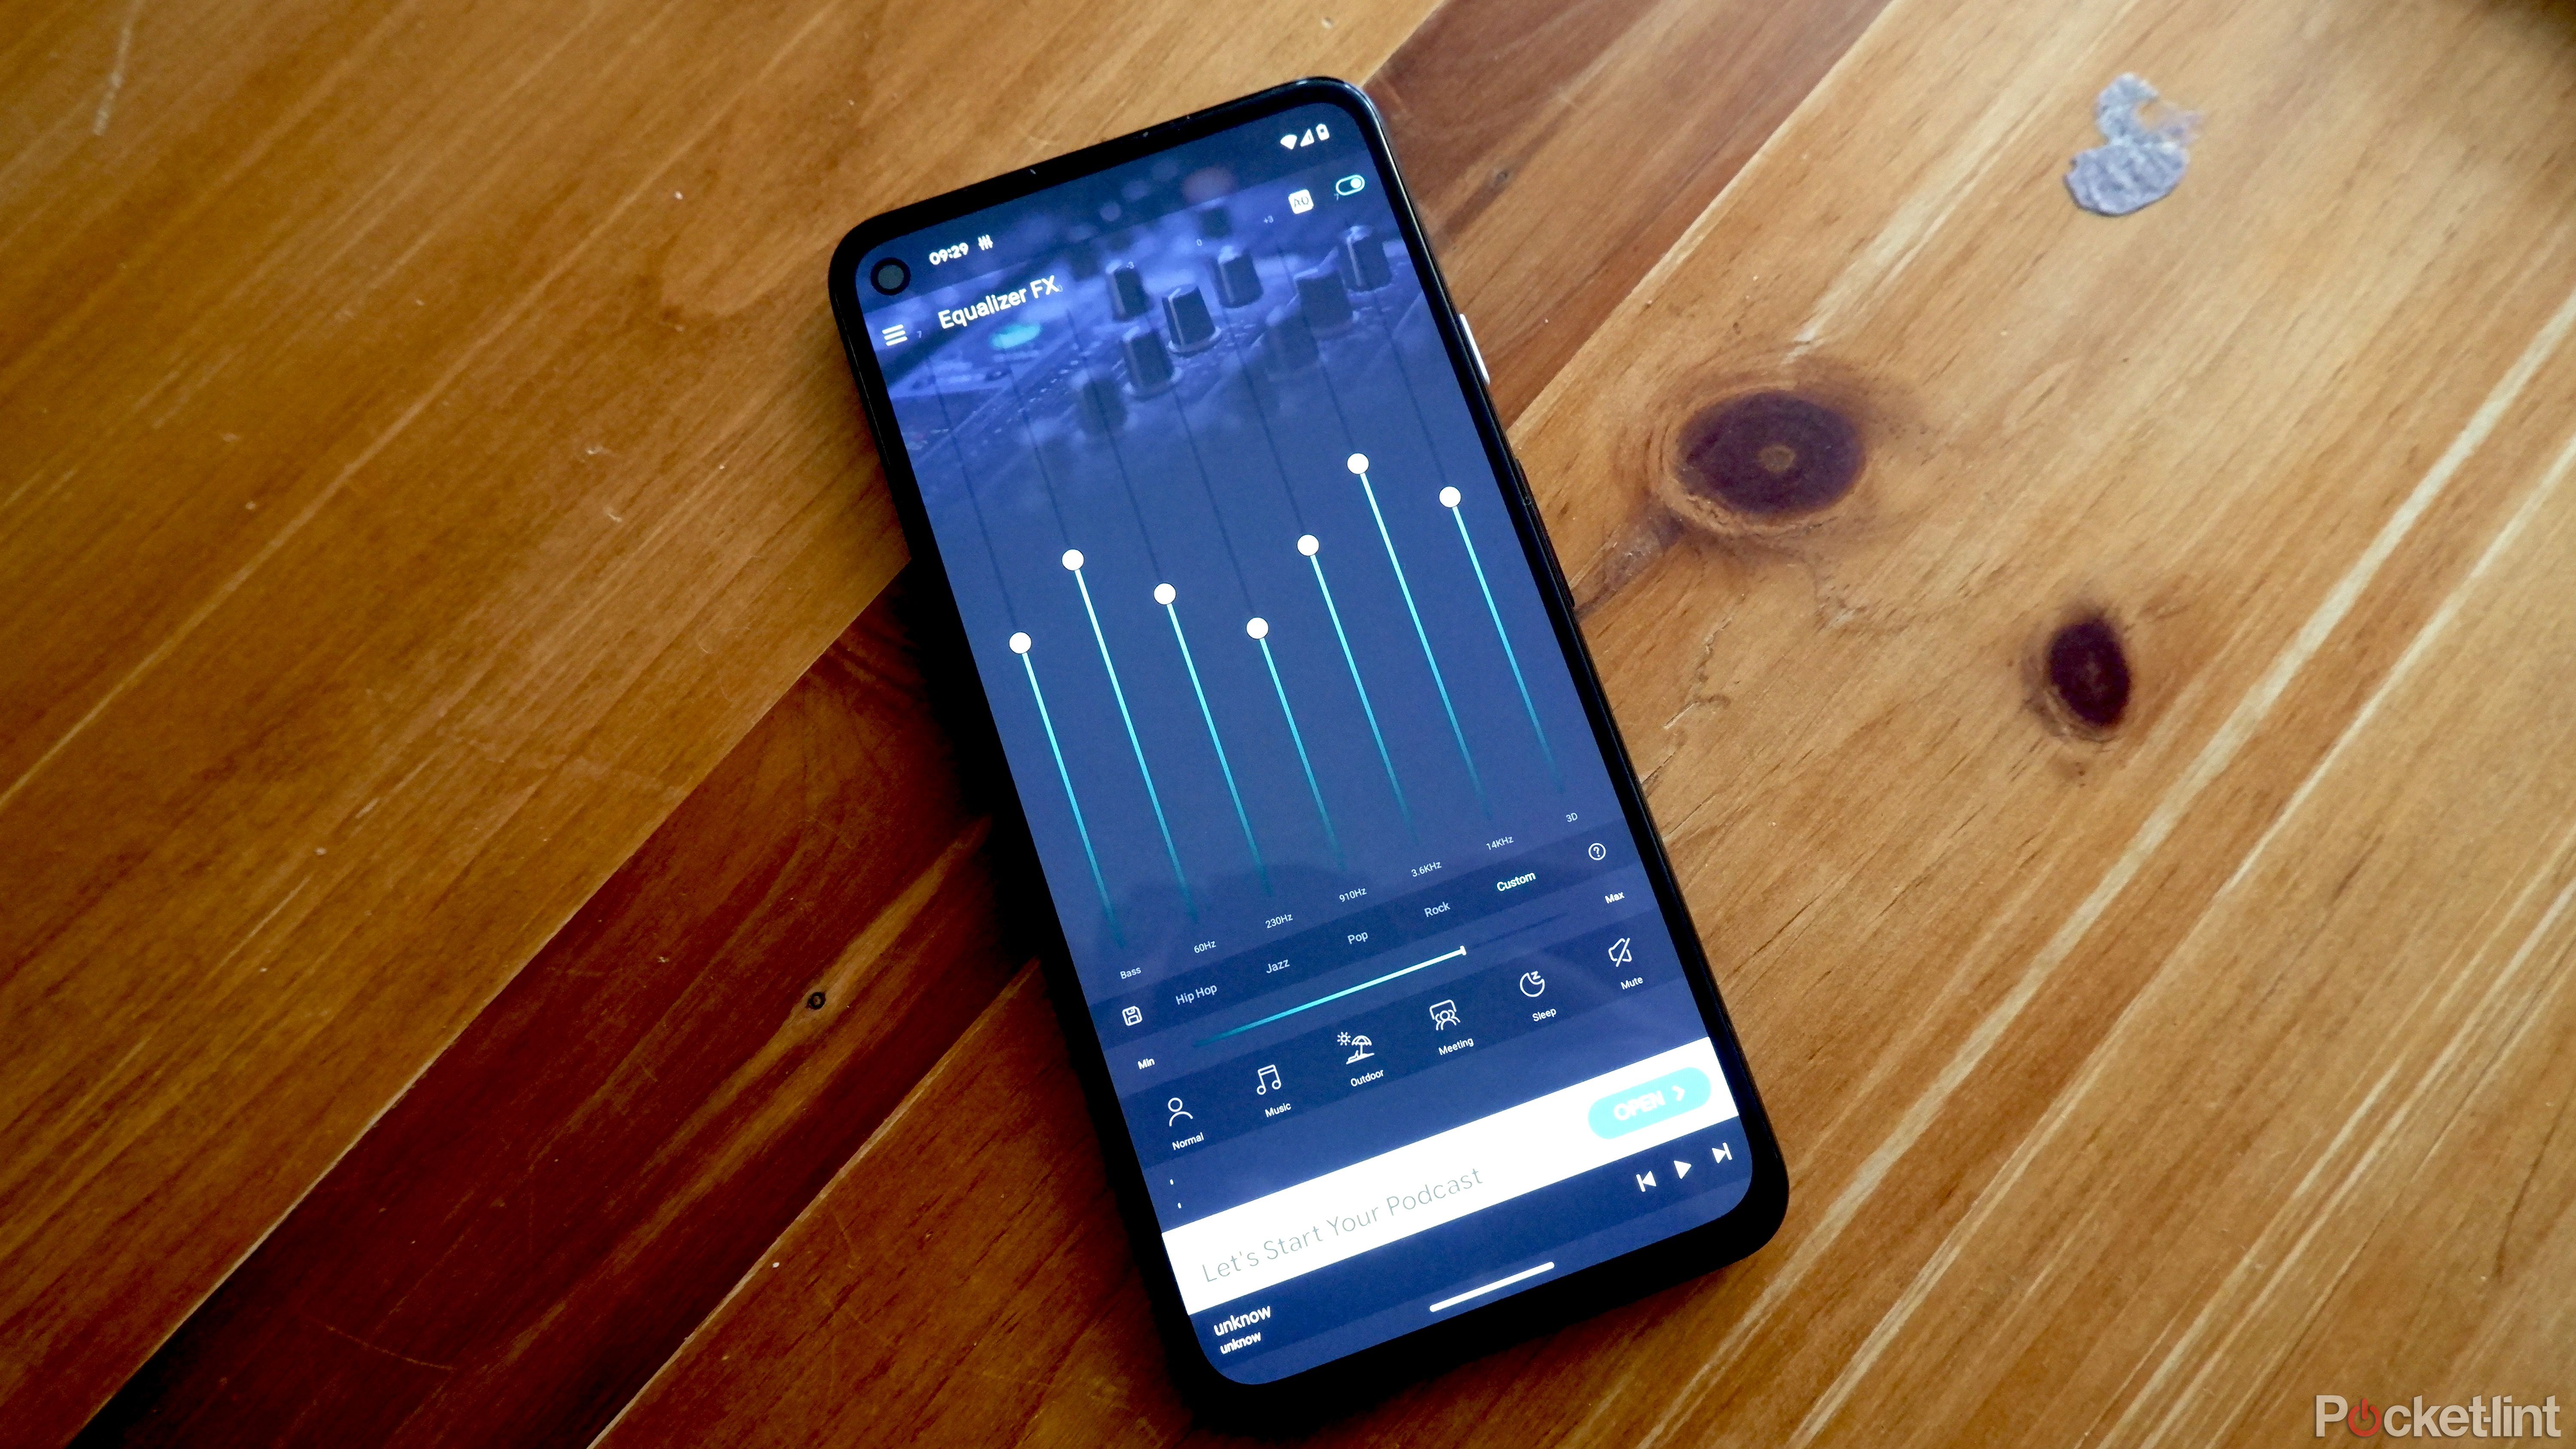 A Google Pixel on a wooden surface with the Equalizer FX app open.